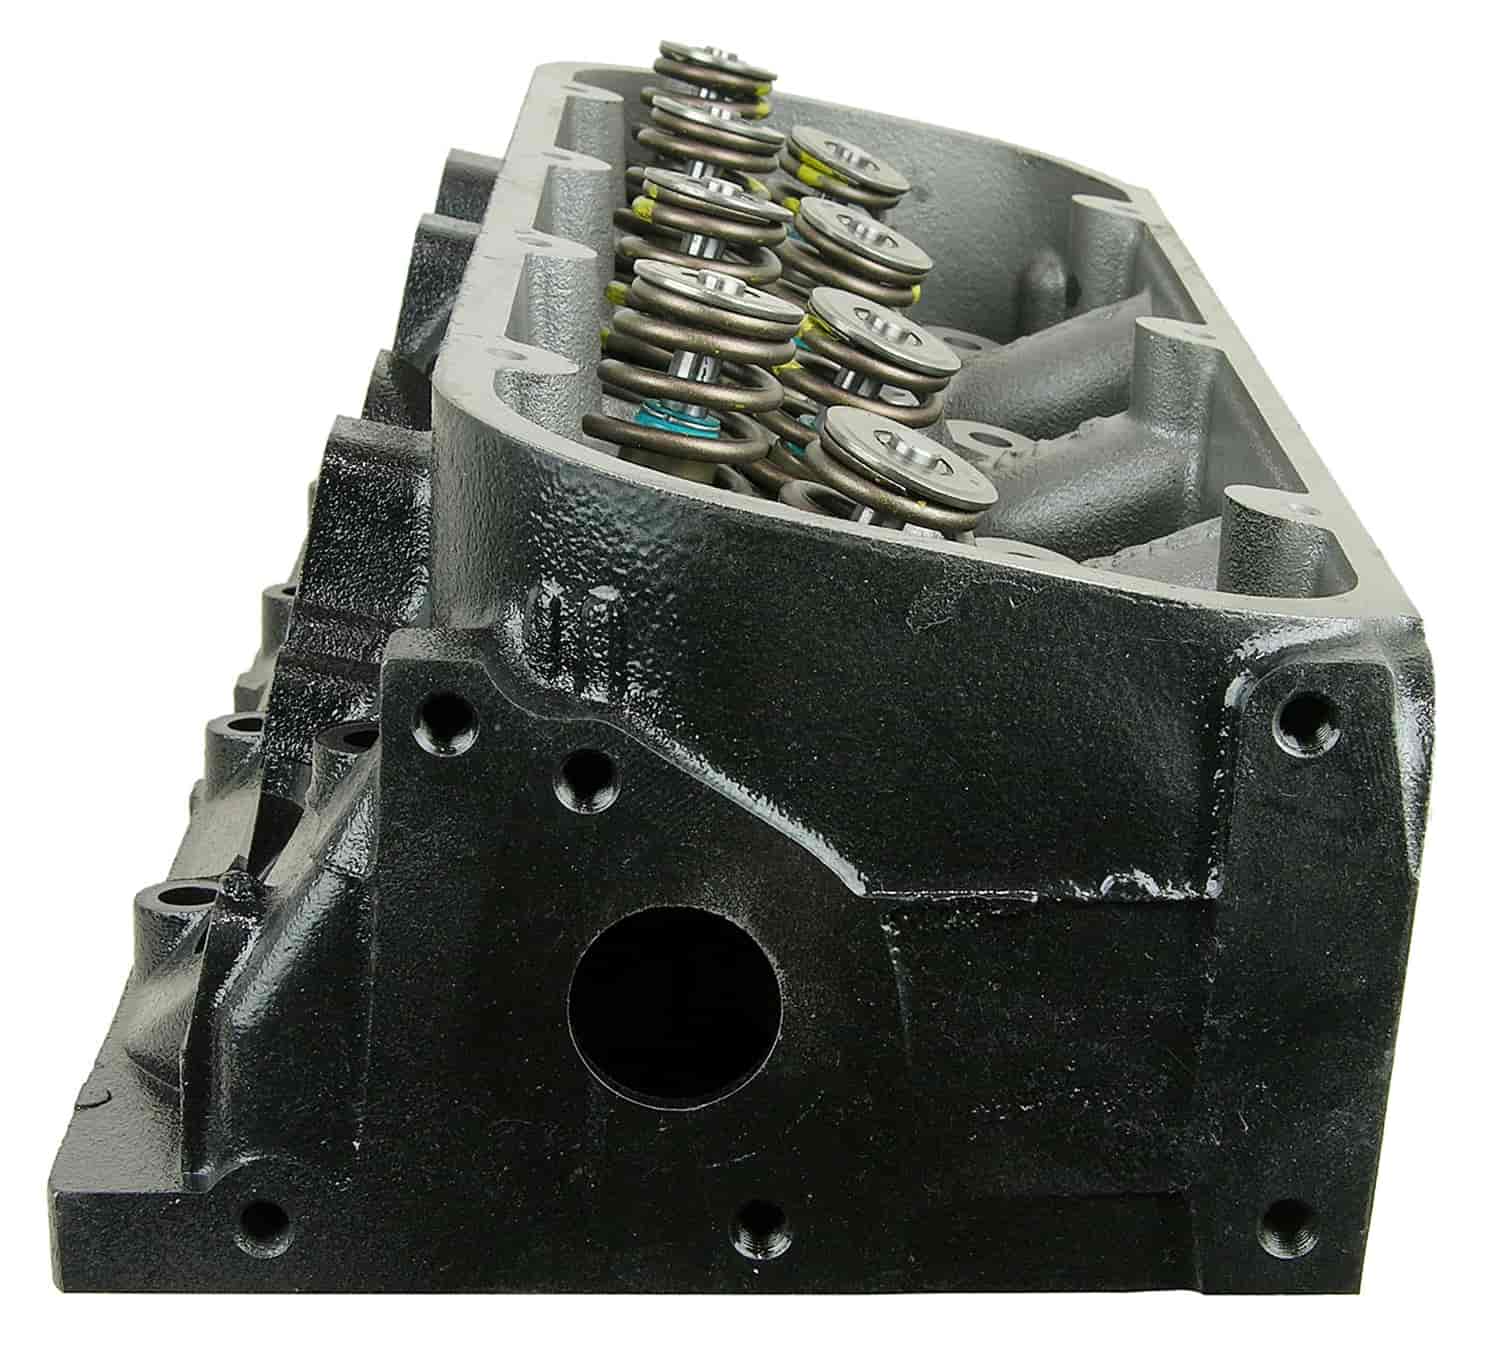 Remanufactured Cylinder Head for 2001-2009 Chevy/GMC Truck, SUV, & Van with CNG 496ci/8.1L V8